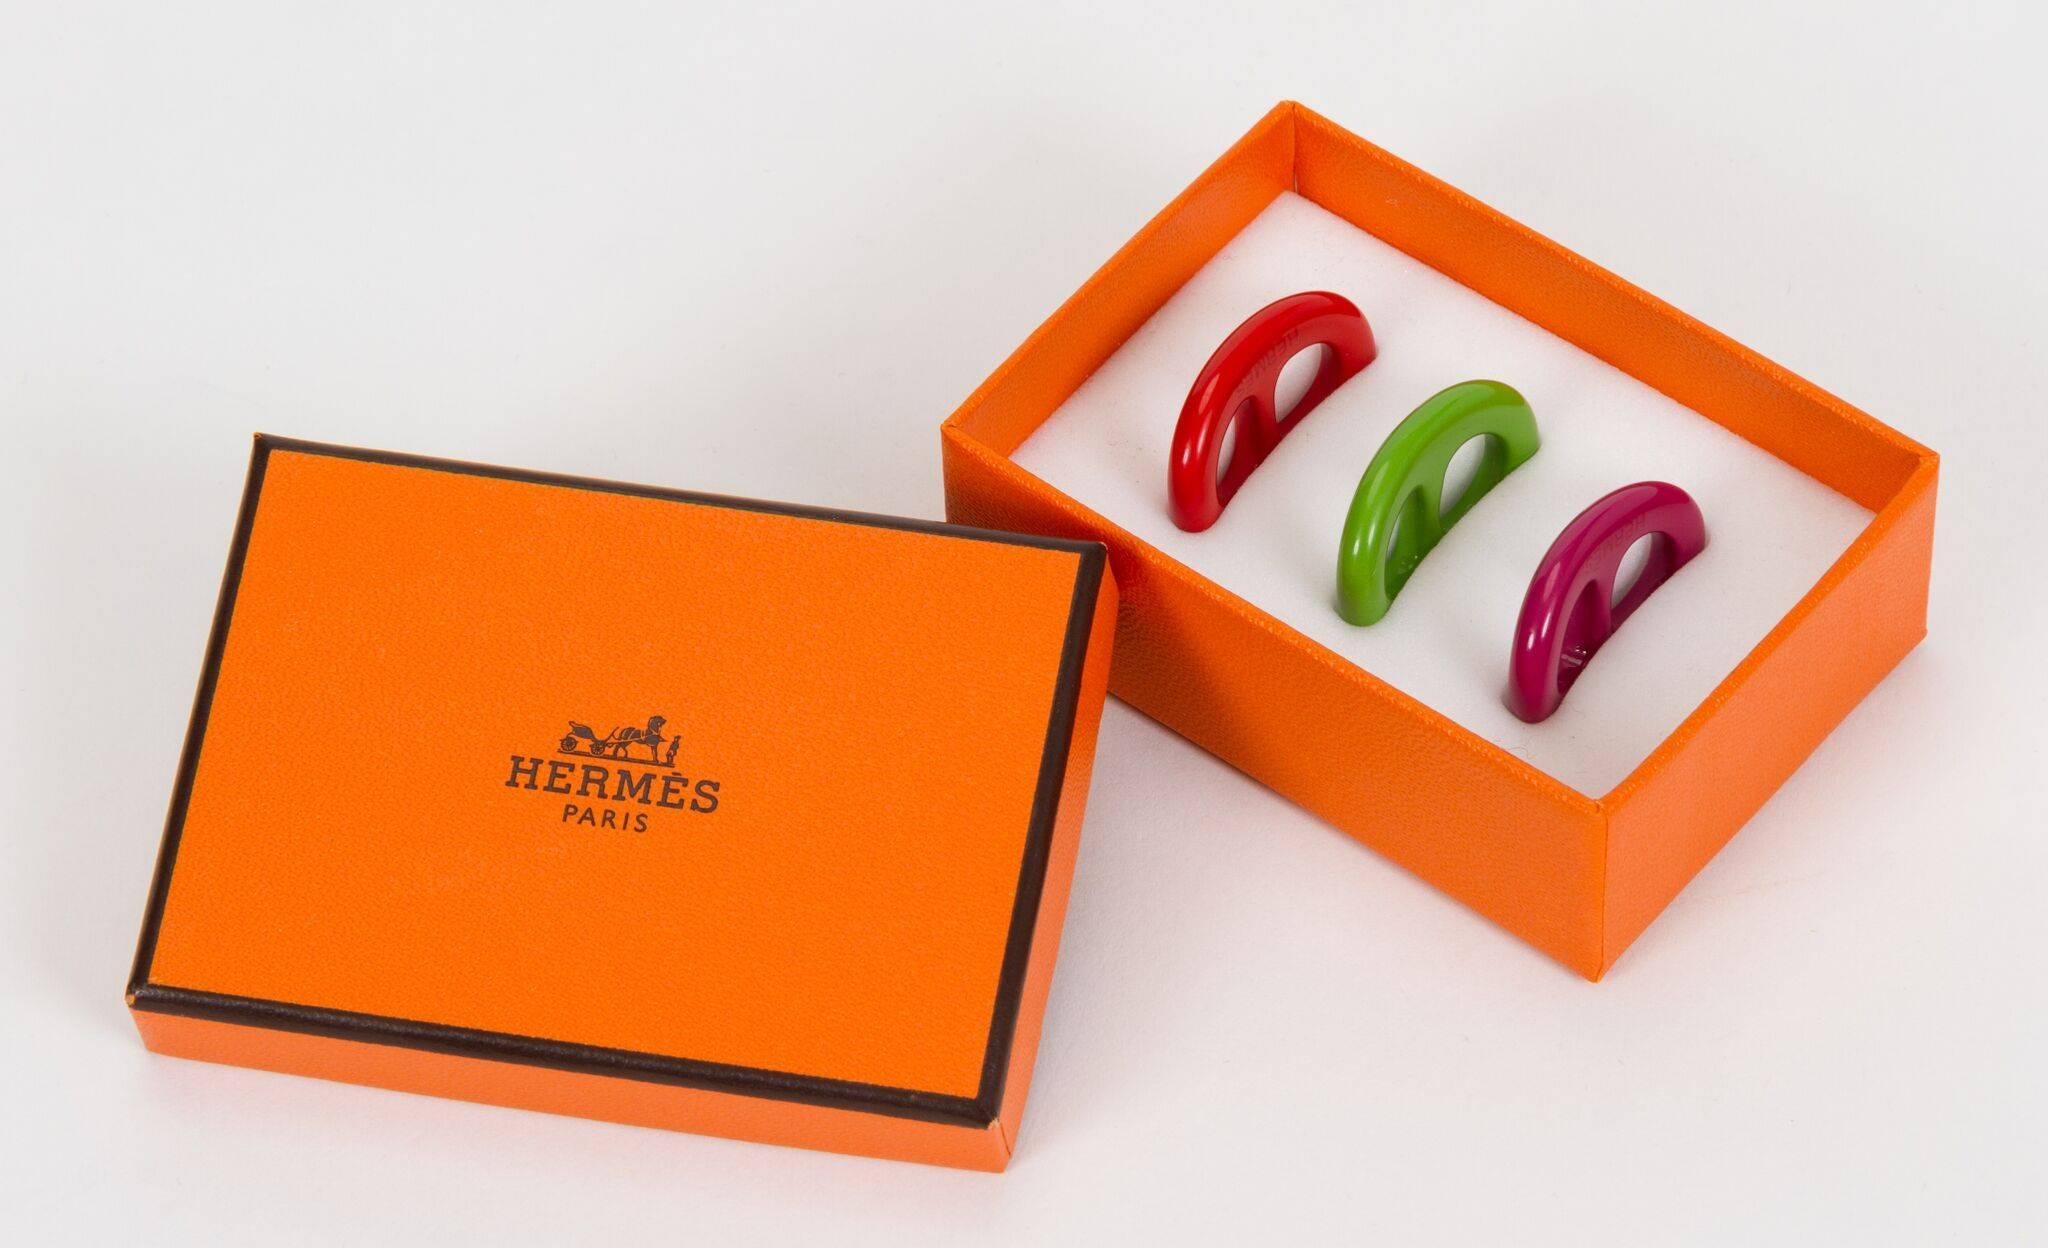 Hermes set of 3 color resin scarf rings. Scarf not included. 2006. Comes with original box and ribbon.